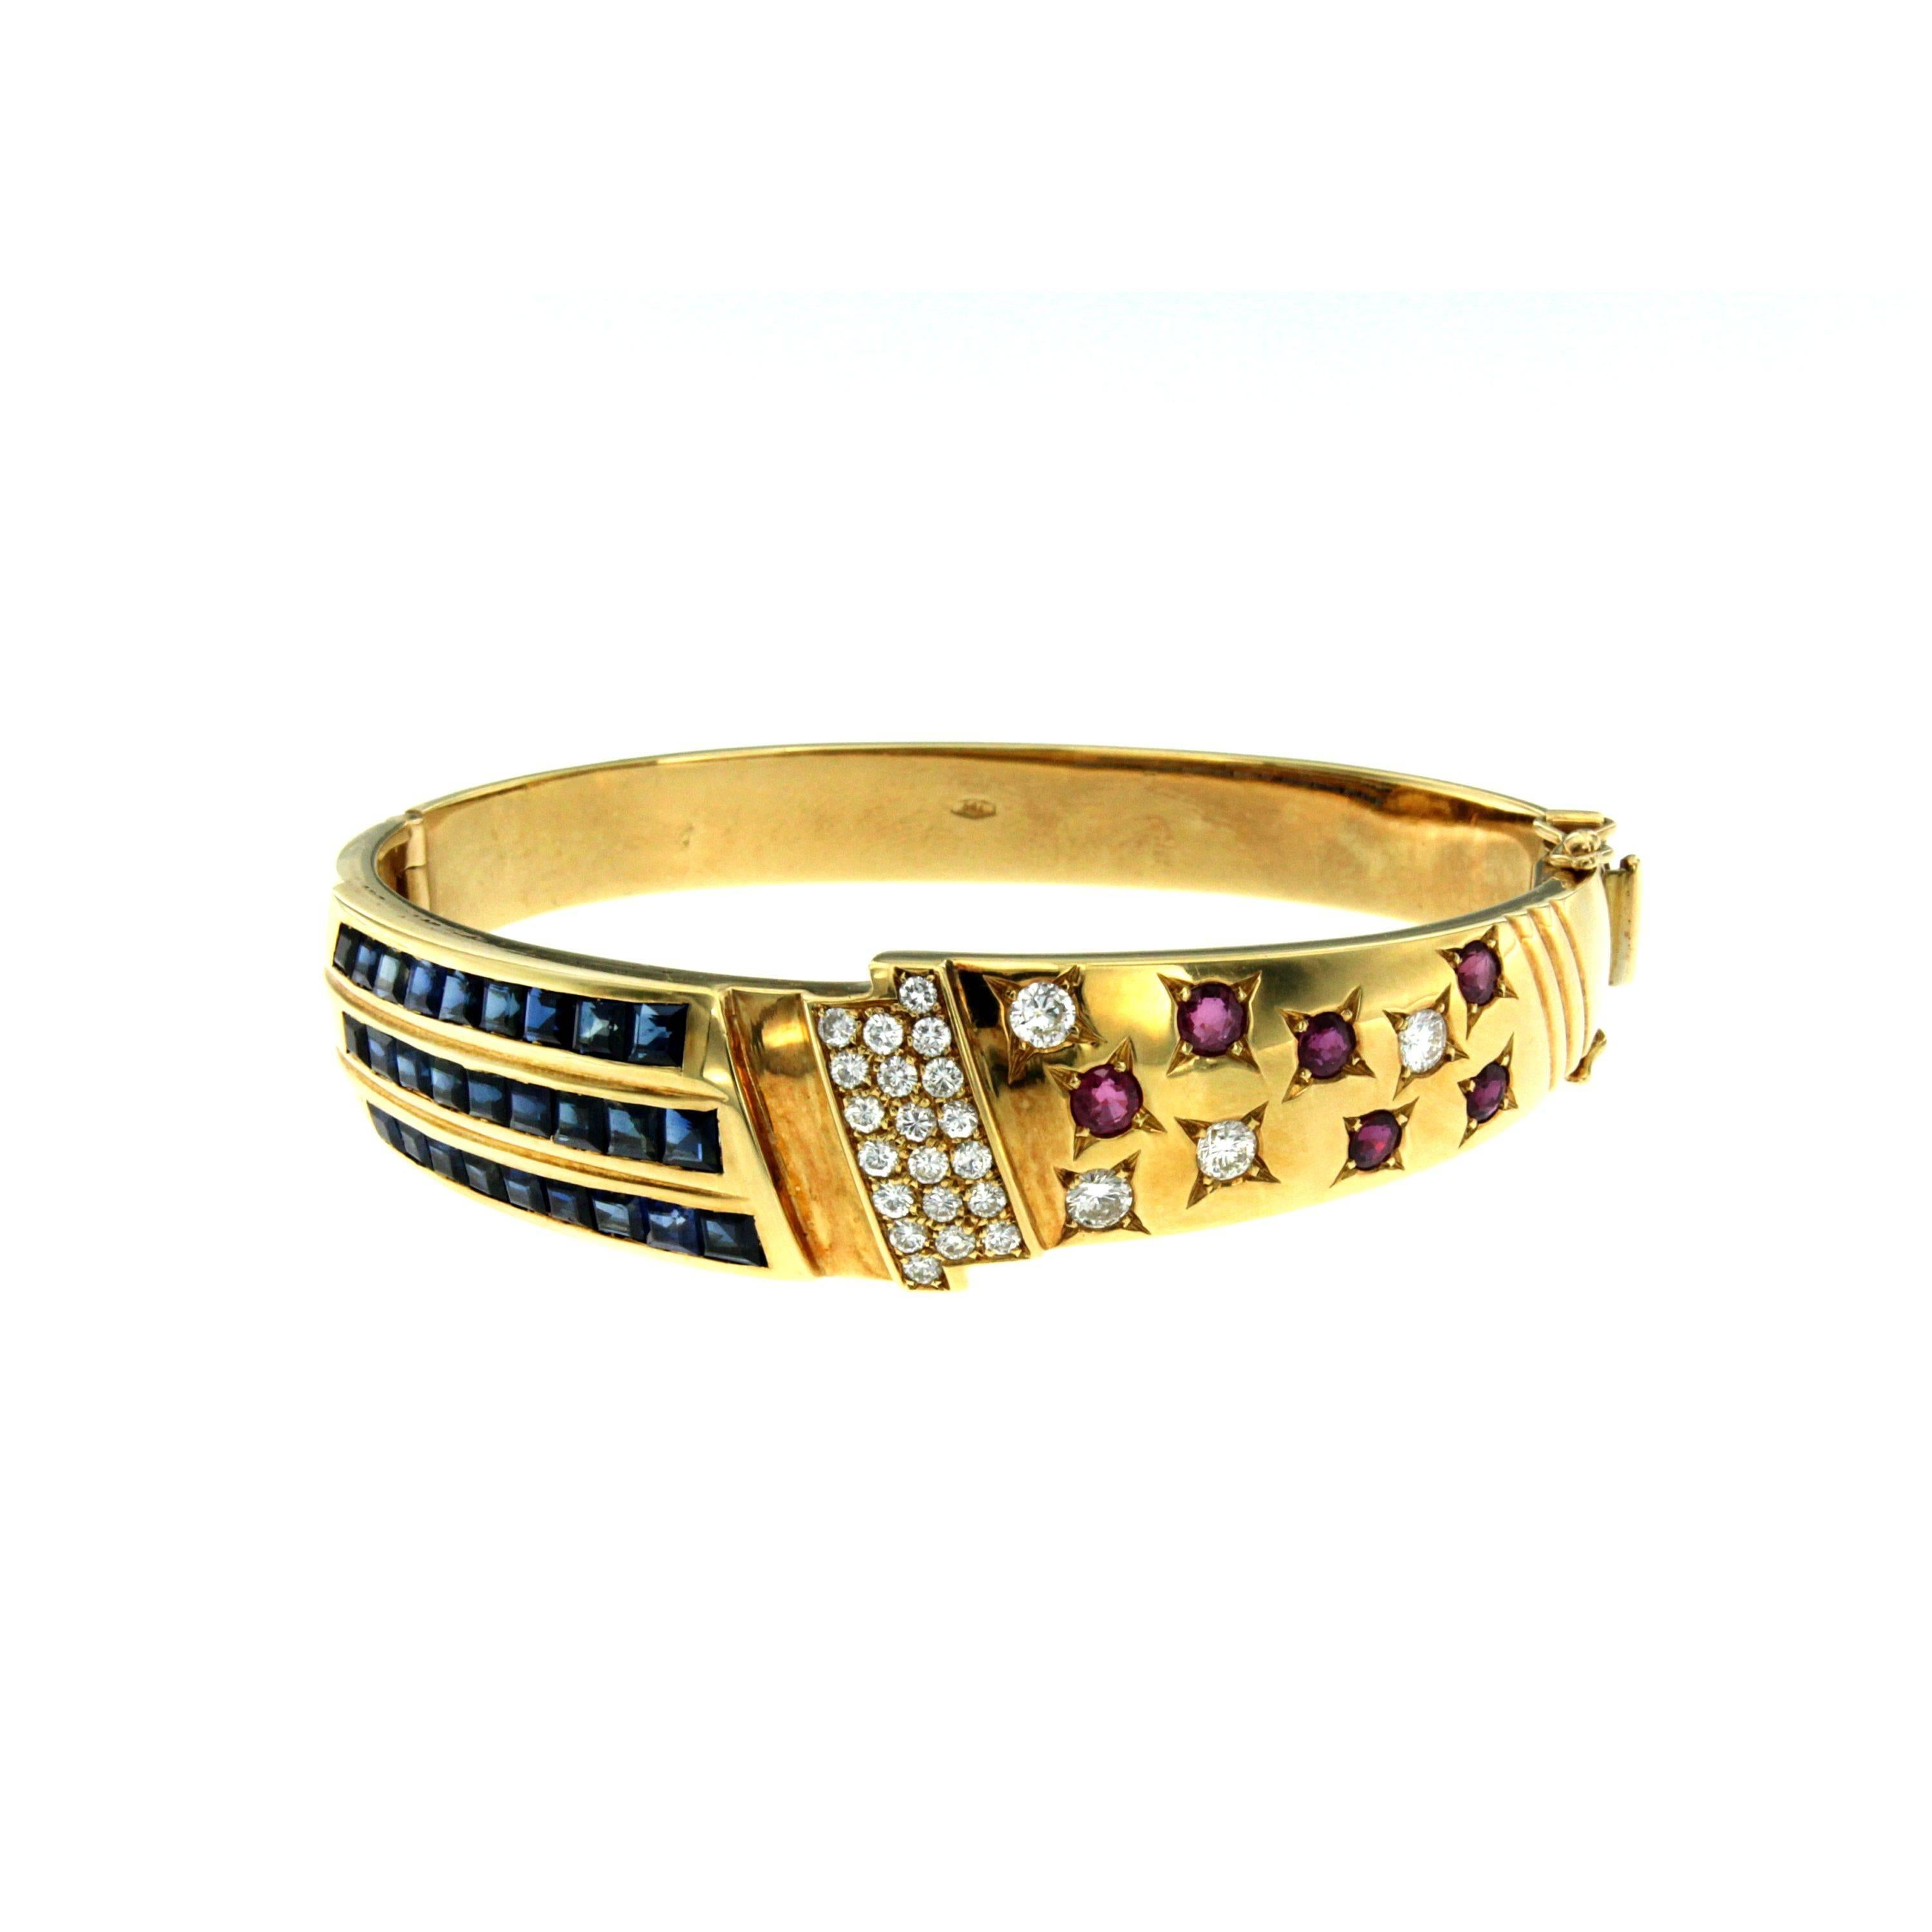 An unusual and elegant 18k yellow Gold bracelet set with three rows of bright natural Sapphires custom cut weighing total. approximately 4.00 carats, 1.10 carat of round brilliant cut graded G color Vvs clarity and 1.20 ct of fine natural